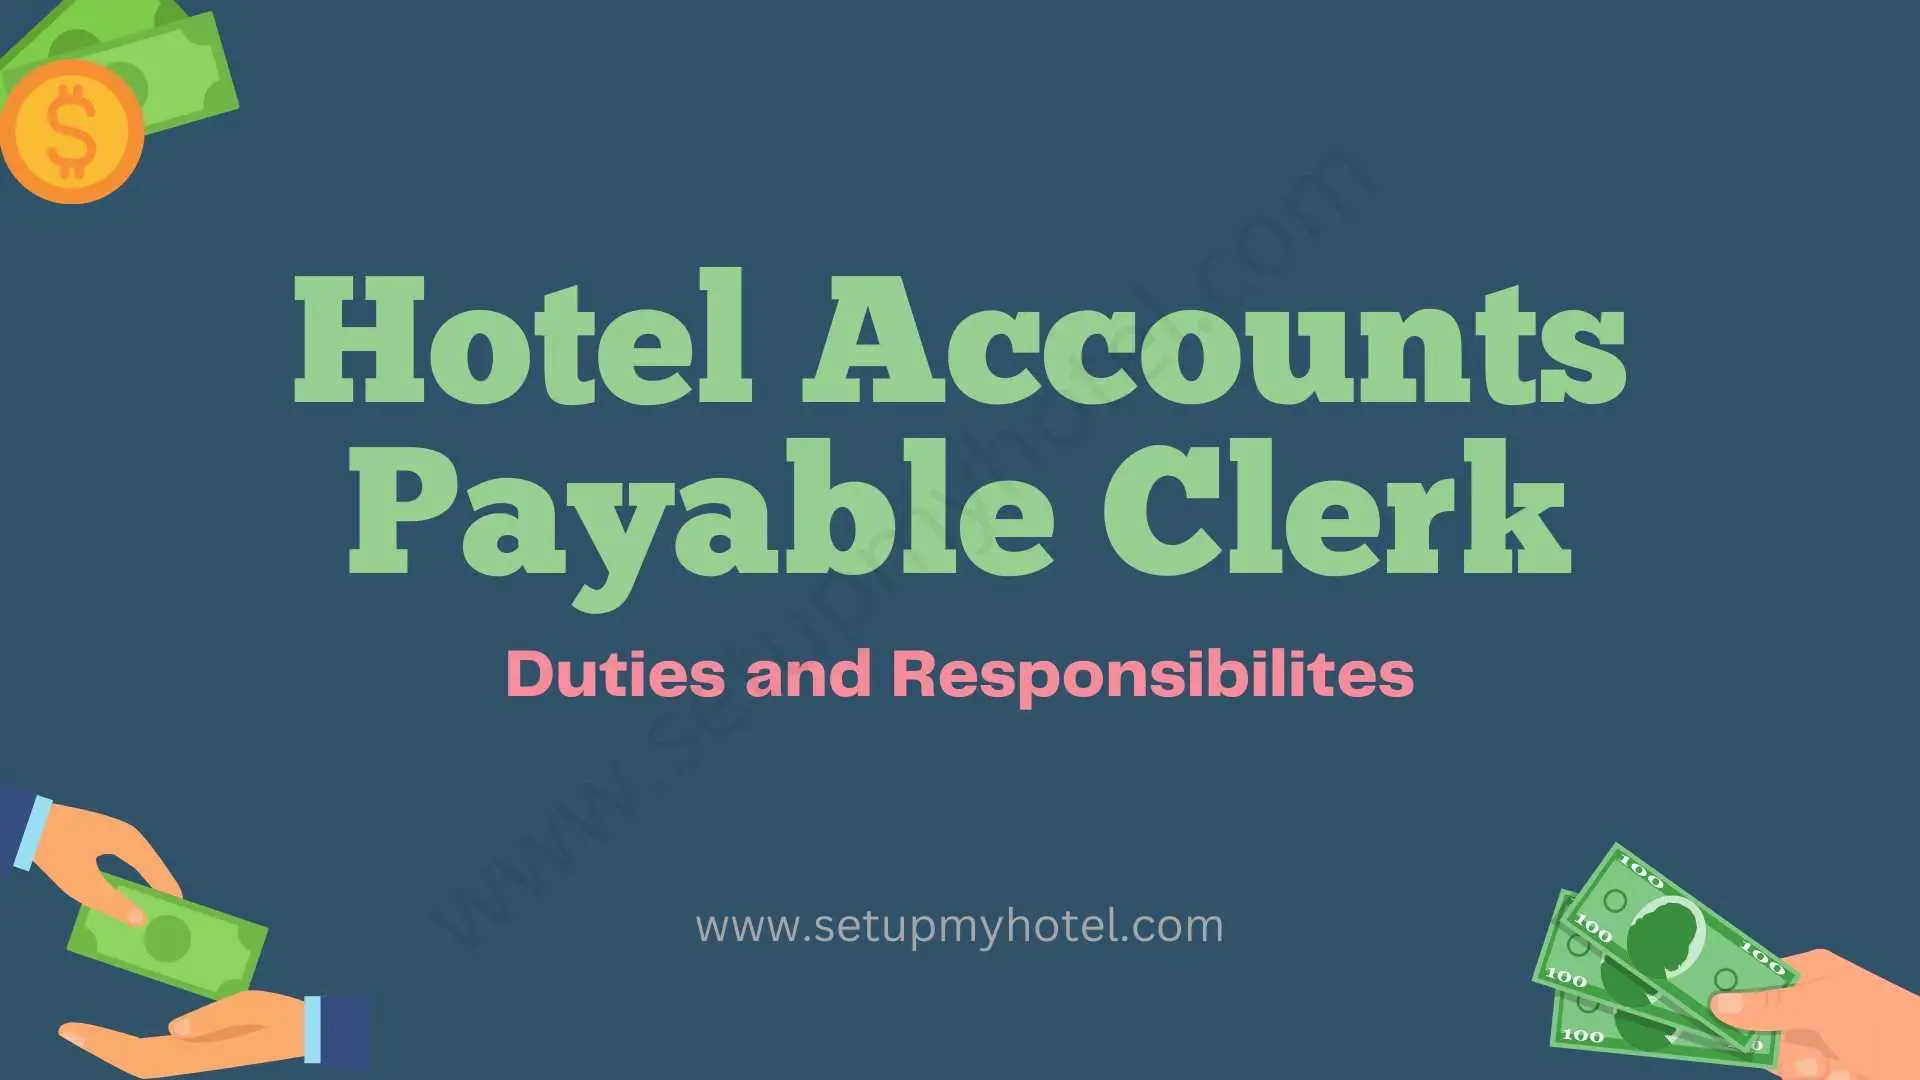 Hotel Accounts Payable Clerk. As a Hotel Accounts Payable Clerk, your main responsibility will be to manage all accounts payable transactions for the hotel. This includes processing invoices, verifying transactions, reconciling accounts, and preparing reports. You will also be responsible for maintaining accurate records of all transactions and ensuring that all payments are made on time. In addition to this, you will be required to communicate effectively with vendors and other departments within the hotel to resolve any issues or discrepancies. To be successful in this role, you should have strong attention to detail, excellent organizational skills, and the ability to work well under pressure. You should also have a good understanding of accounting principles and be comfortable working with accounting software. If you are looking for a challenging and rewarding role in the hospitality industry, then this may be the perfect job for you. So, if you are interested in becoming a Hotel Accounts Payable Clerk, then we would love to hear from you.